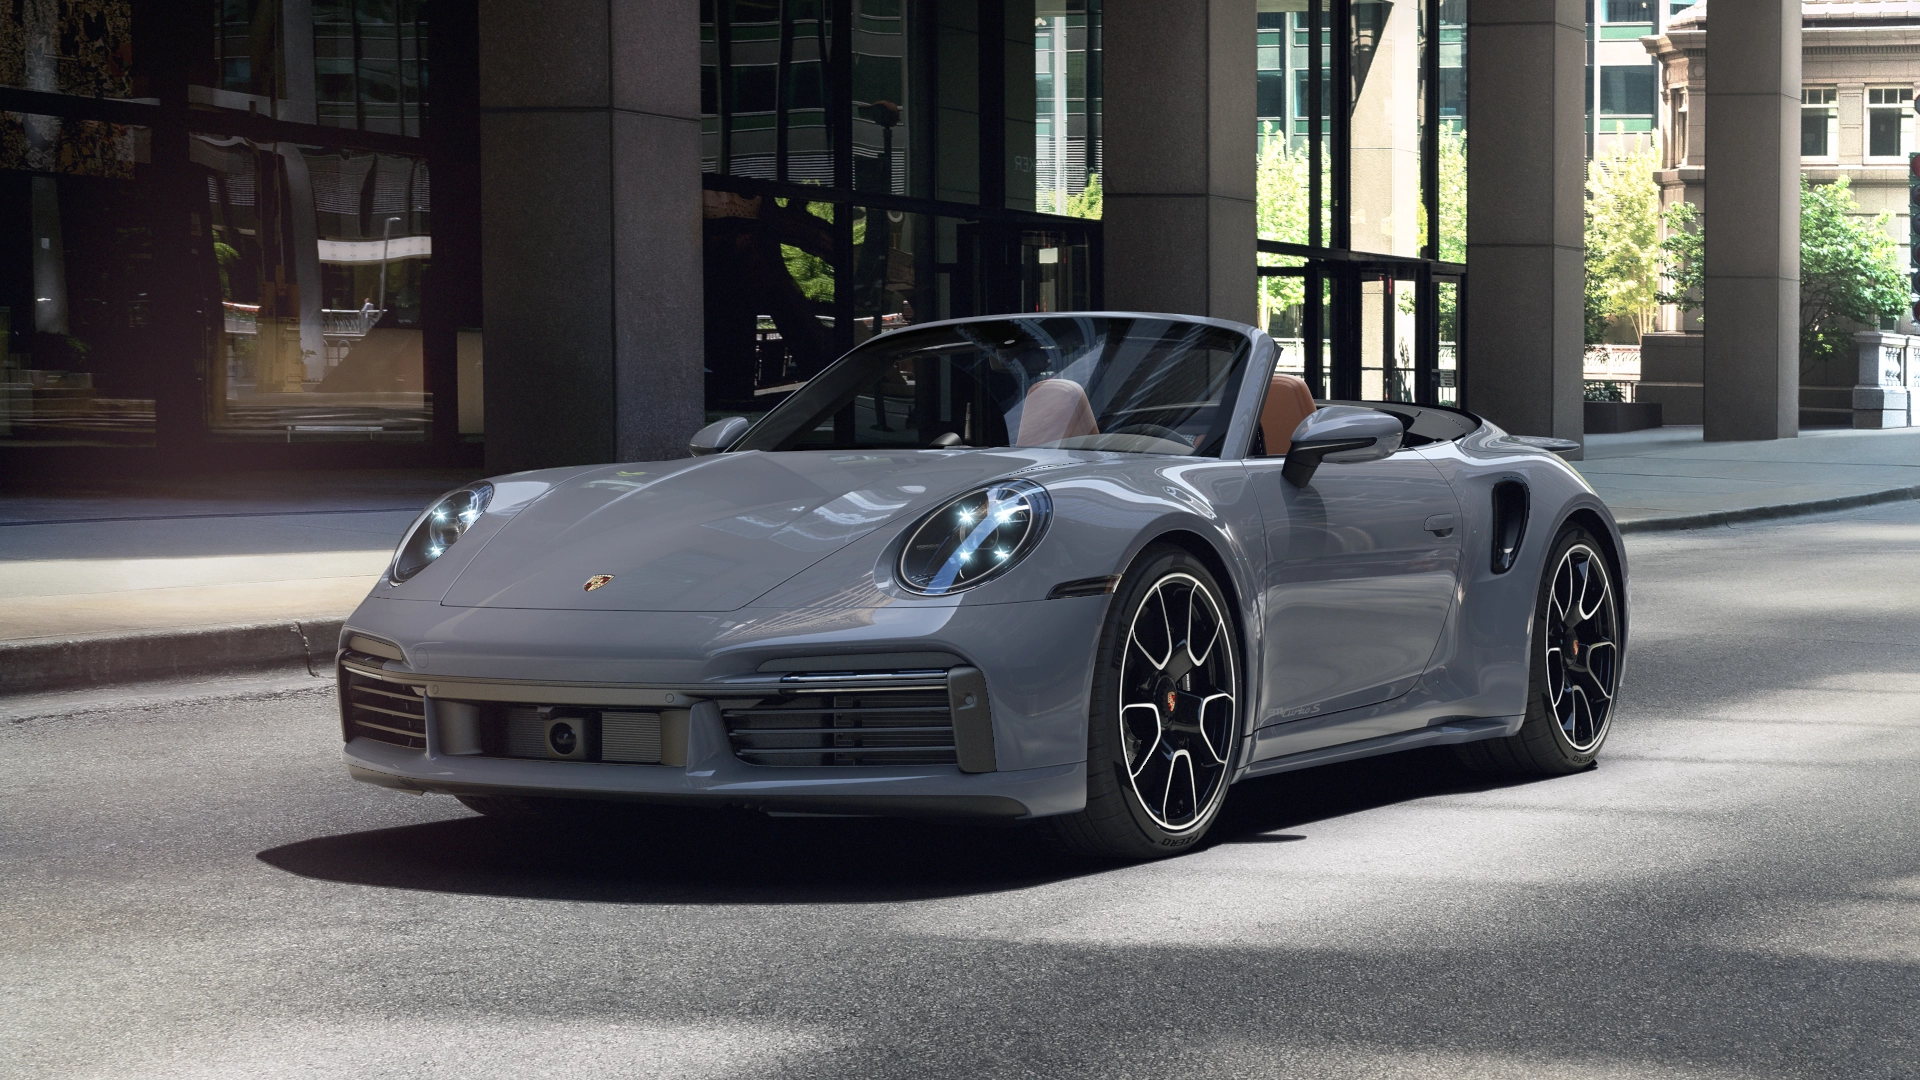 911 Turbo S Cabriolet front view